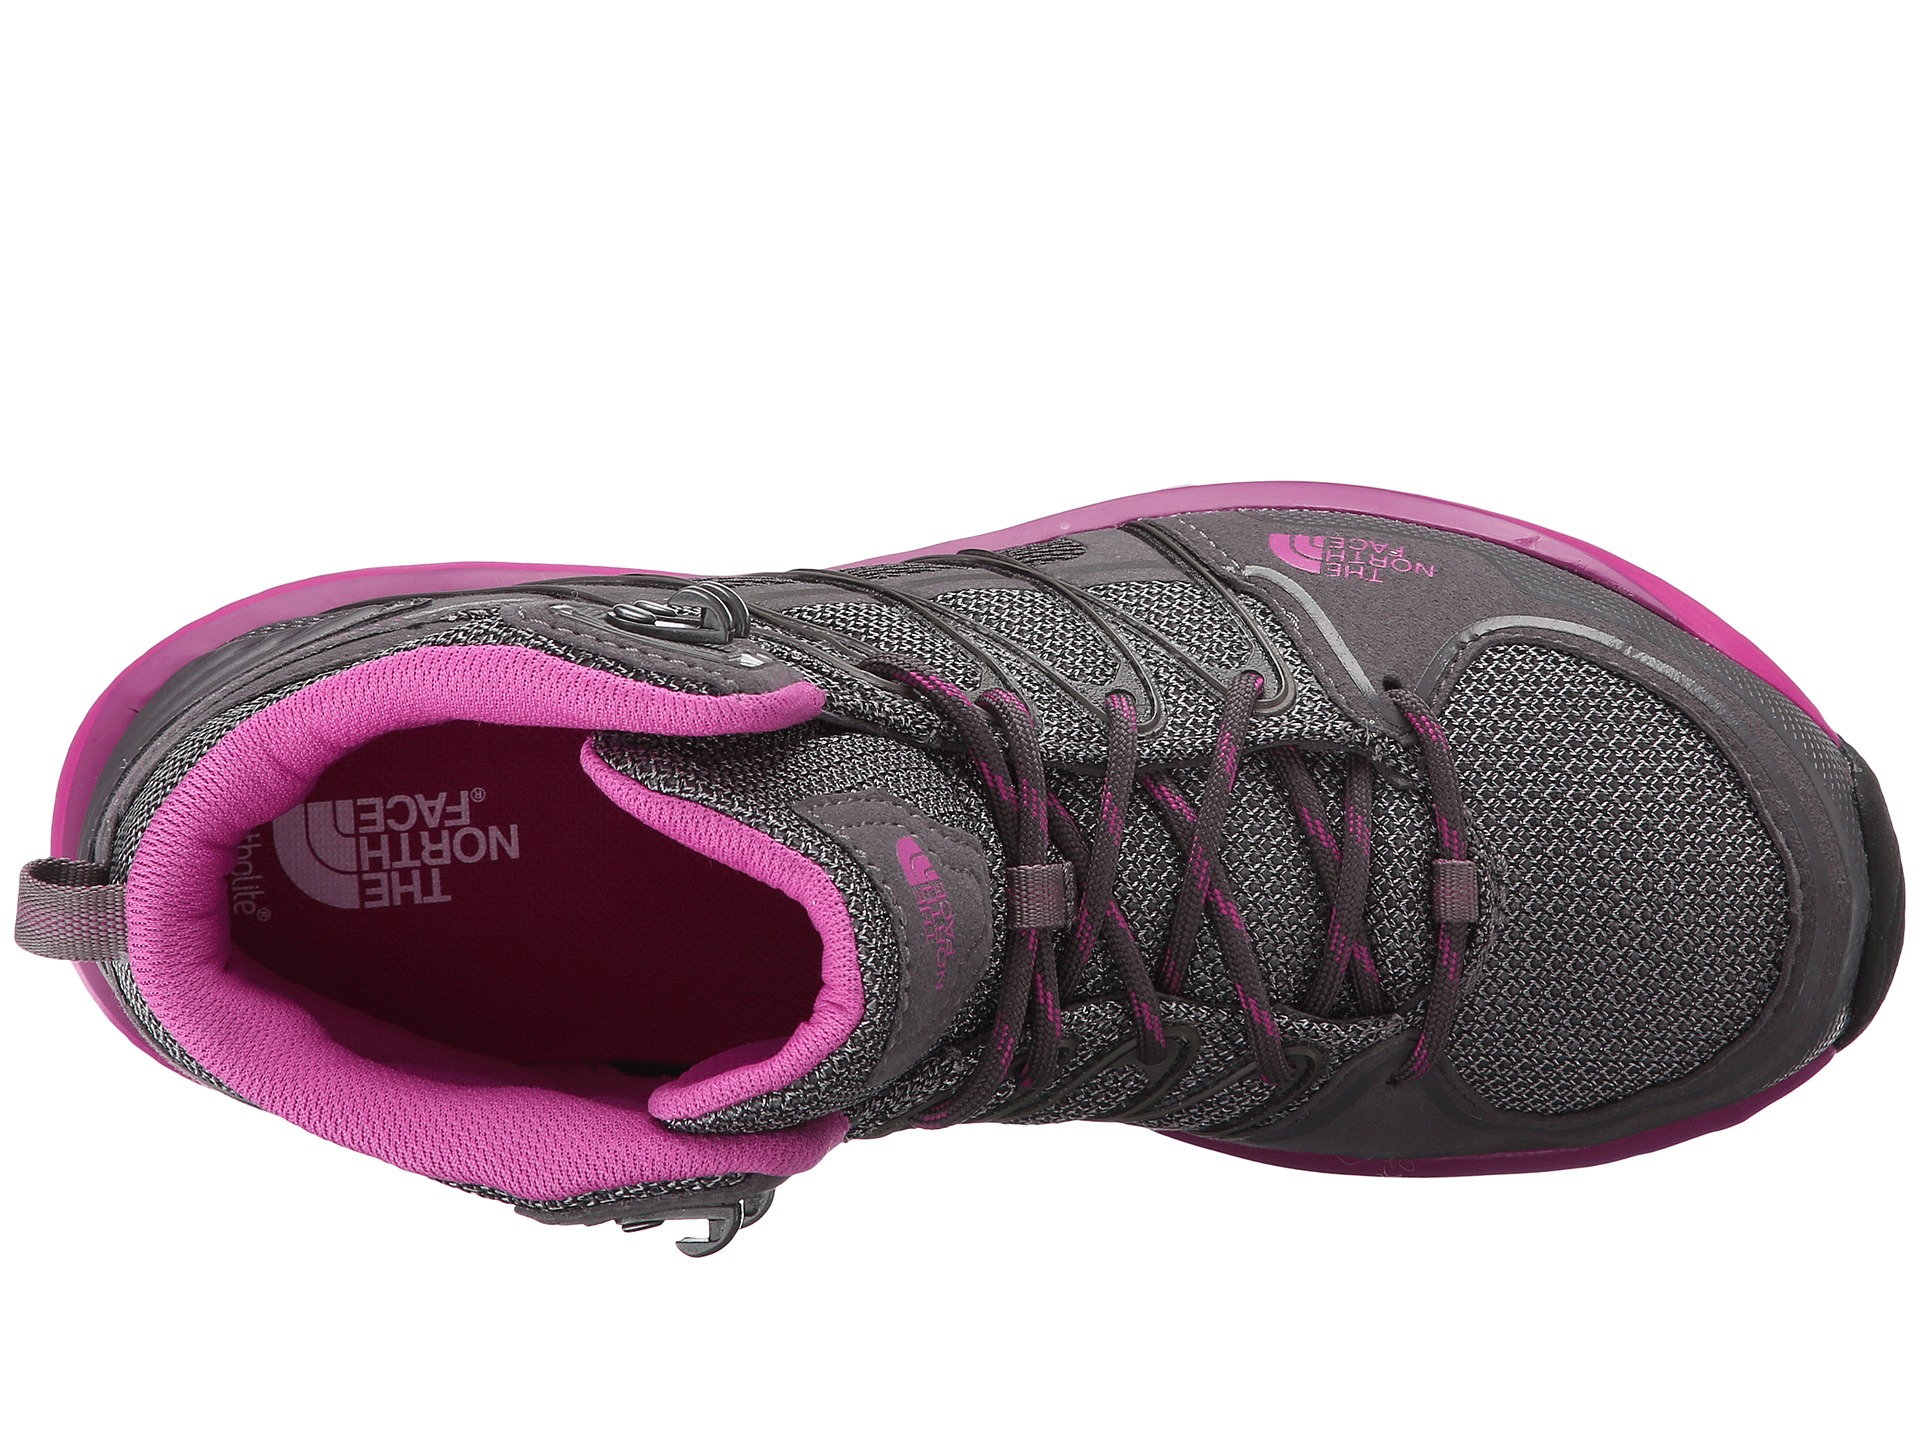 The North Face Litewave Explore Mid Steeple Grey/Raspberry Rose ...